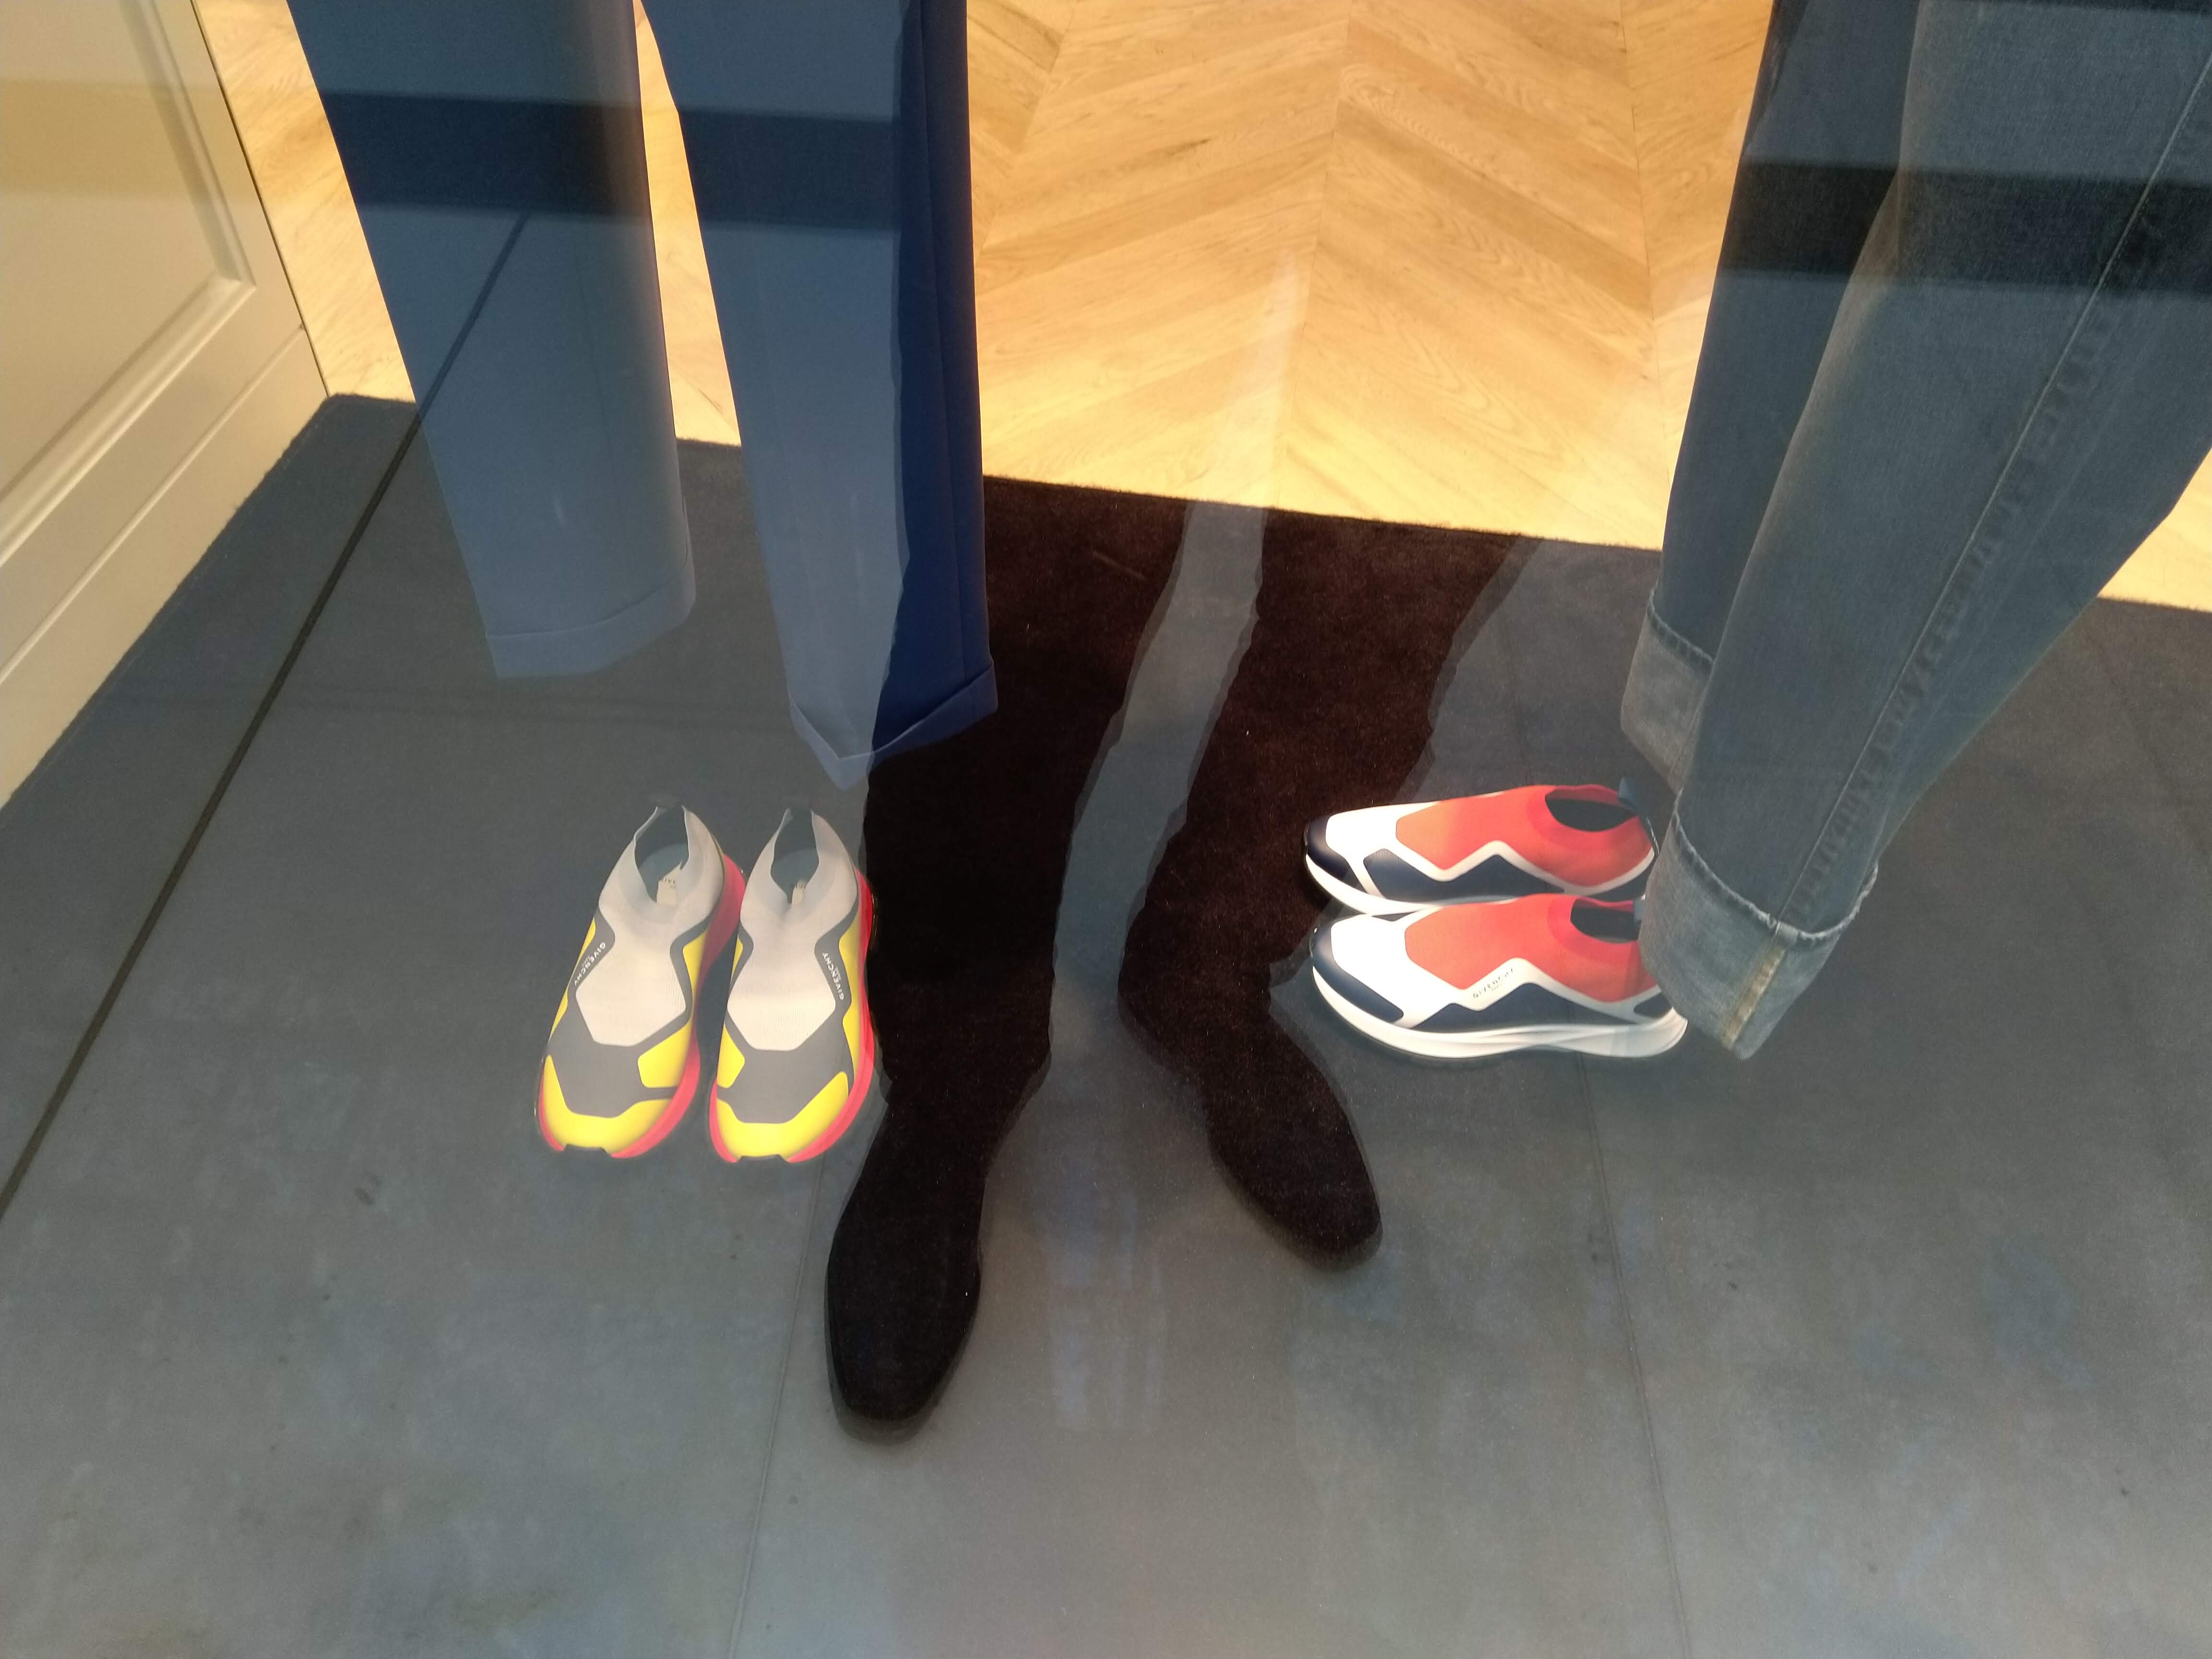 stylish shoes in store window